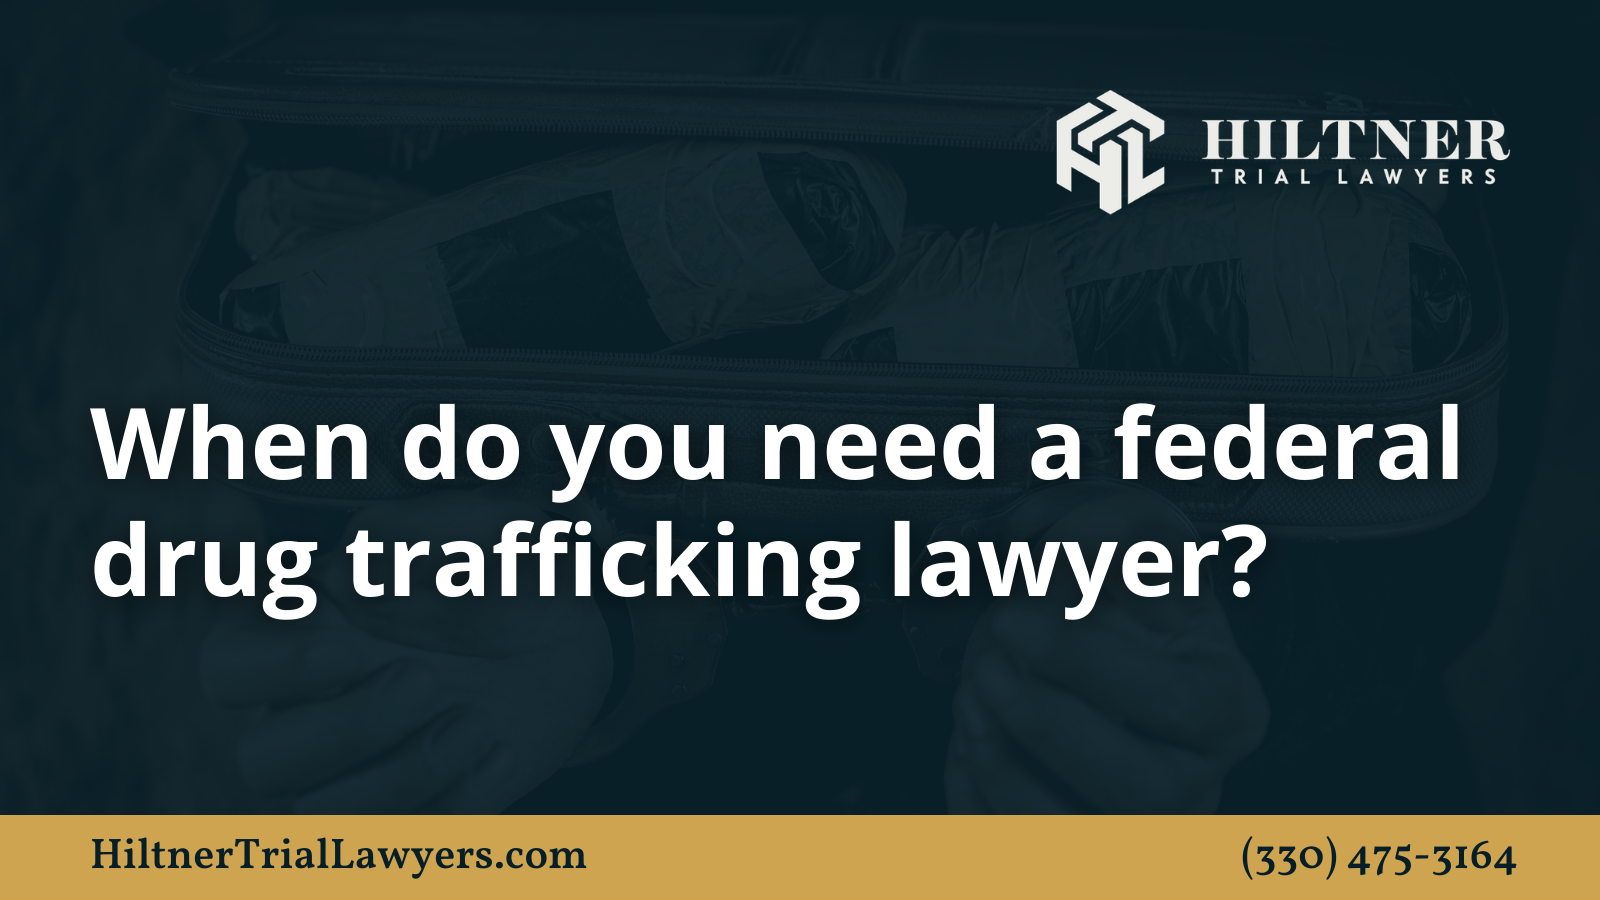 When do you need a federal drug trafficking lawyer - Hiltner Trial Lawyers Ohio - max hiltner